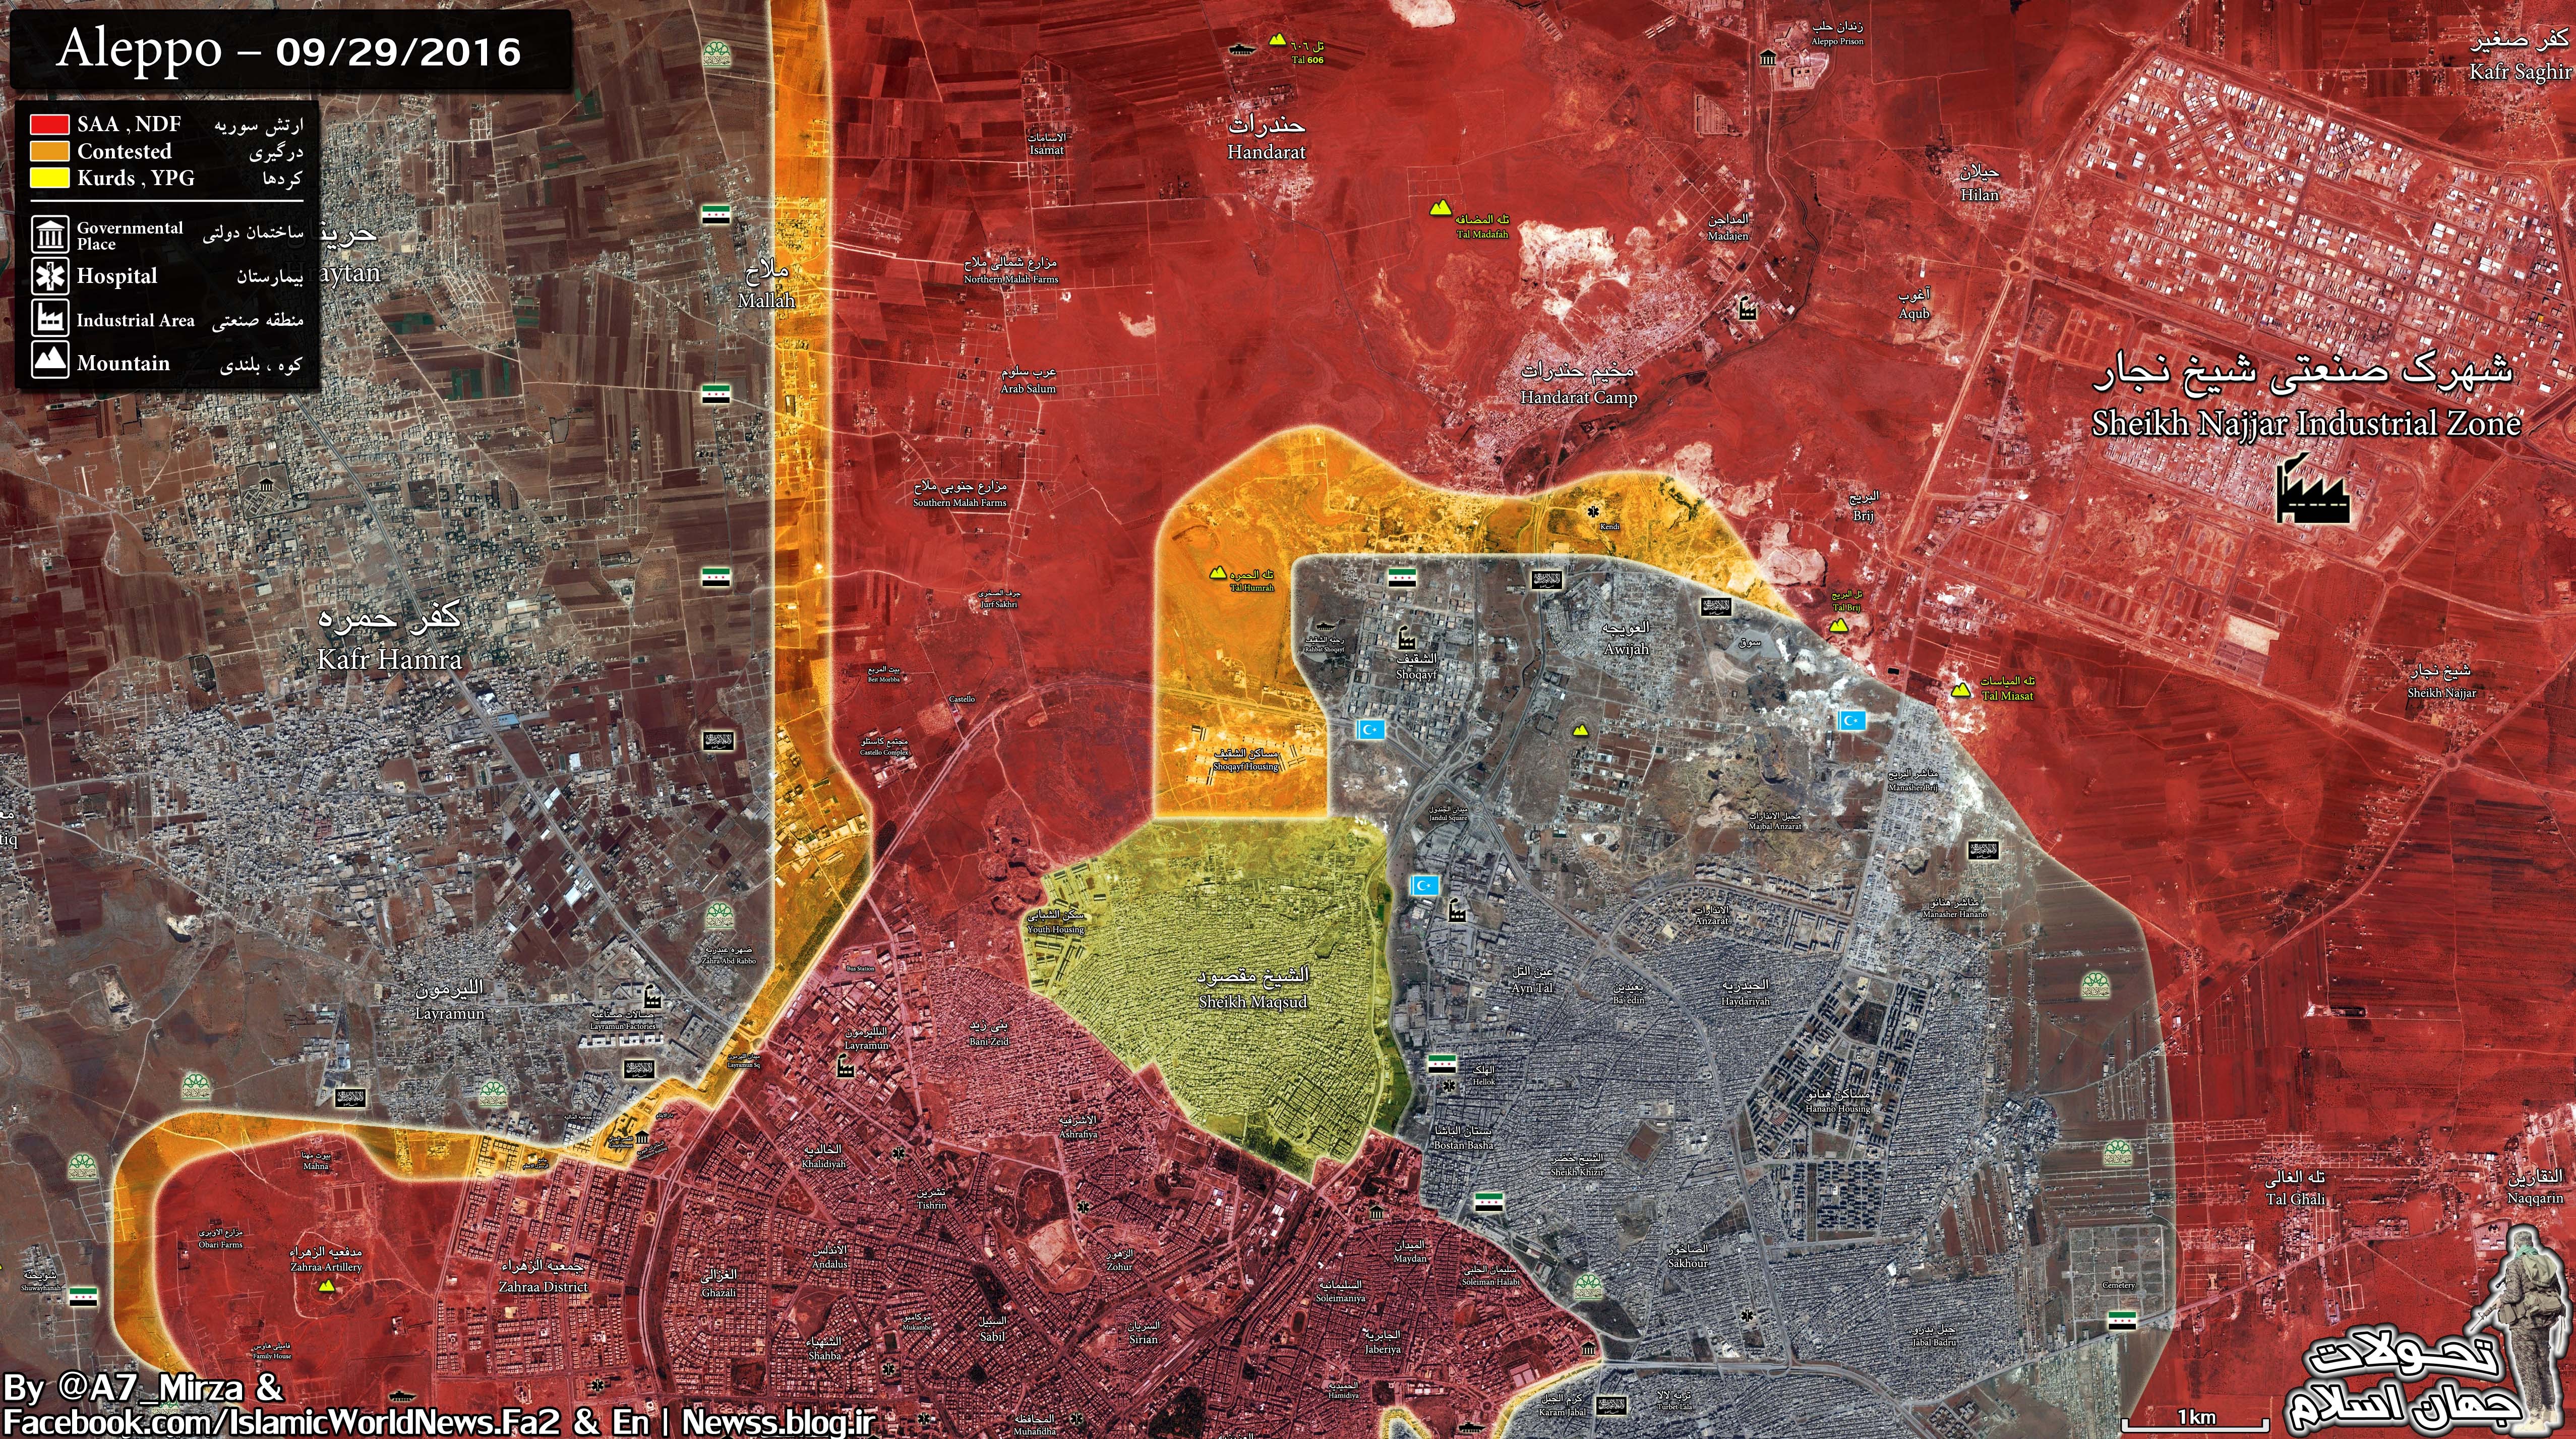 Overview of Military Situation in Aleppo City on September 30